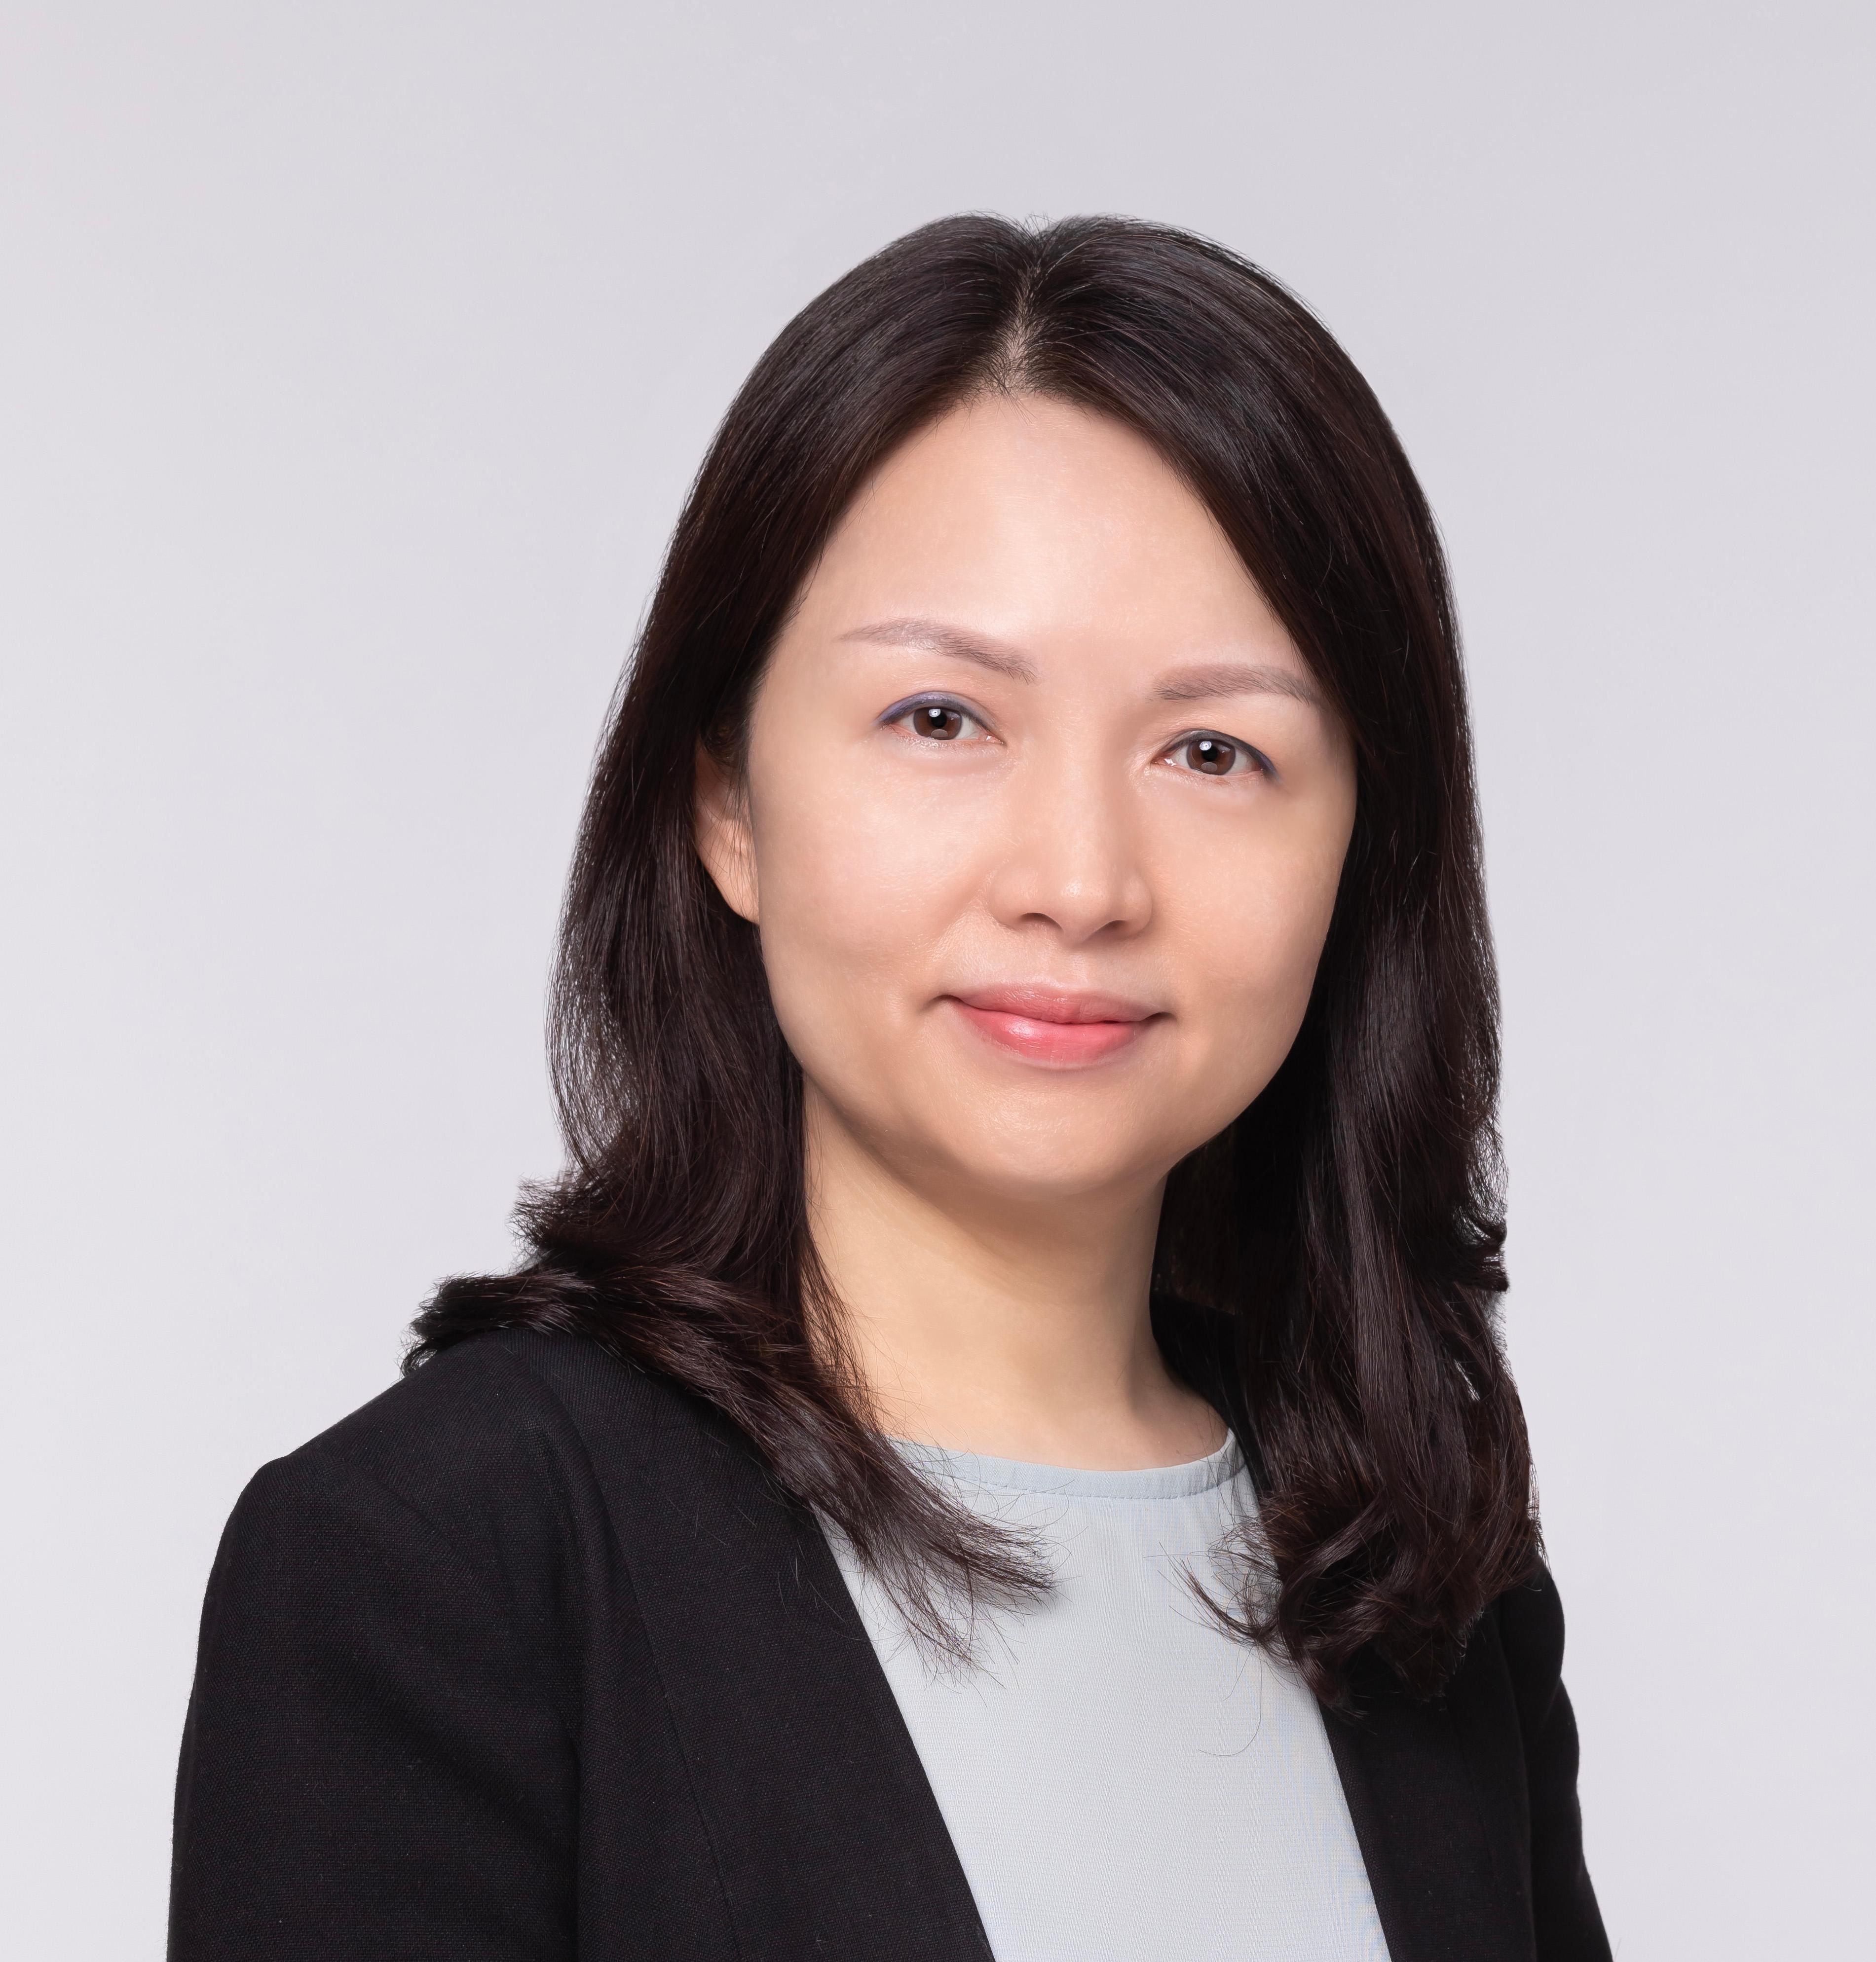 The Legislative Council Commission announced today (January 15) the appointment of Ms Dora Wai to succeed Mr Kenneth Chen as the Secretary General of the LegCo Secretariat.